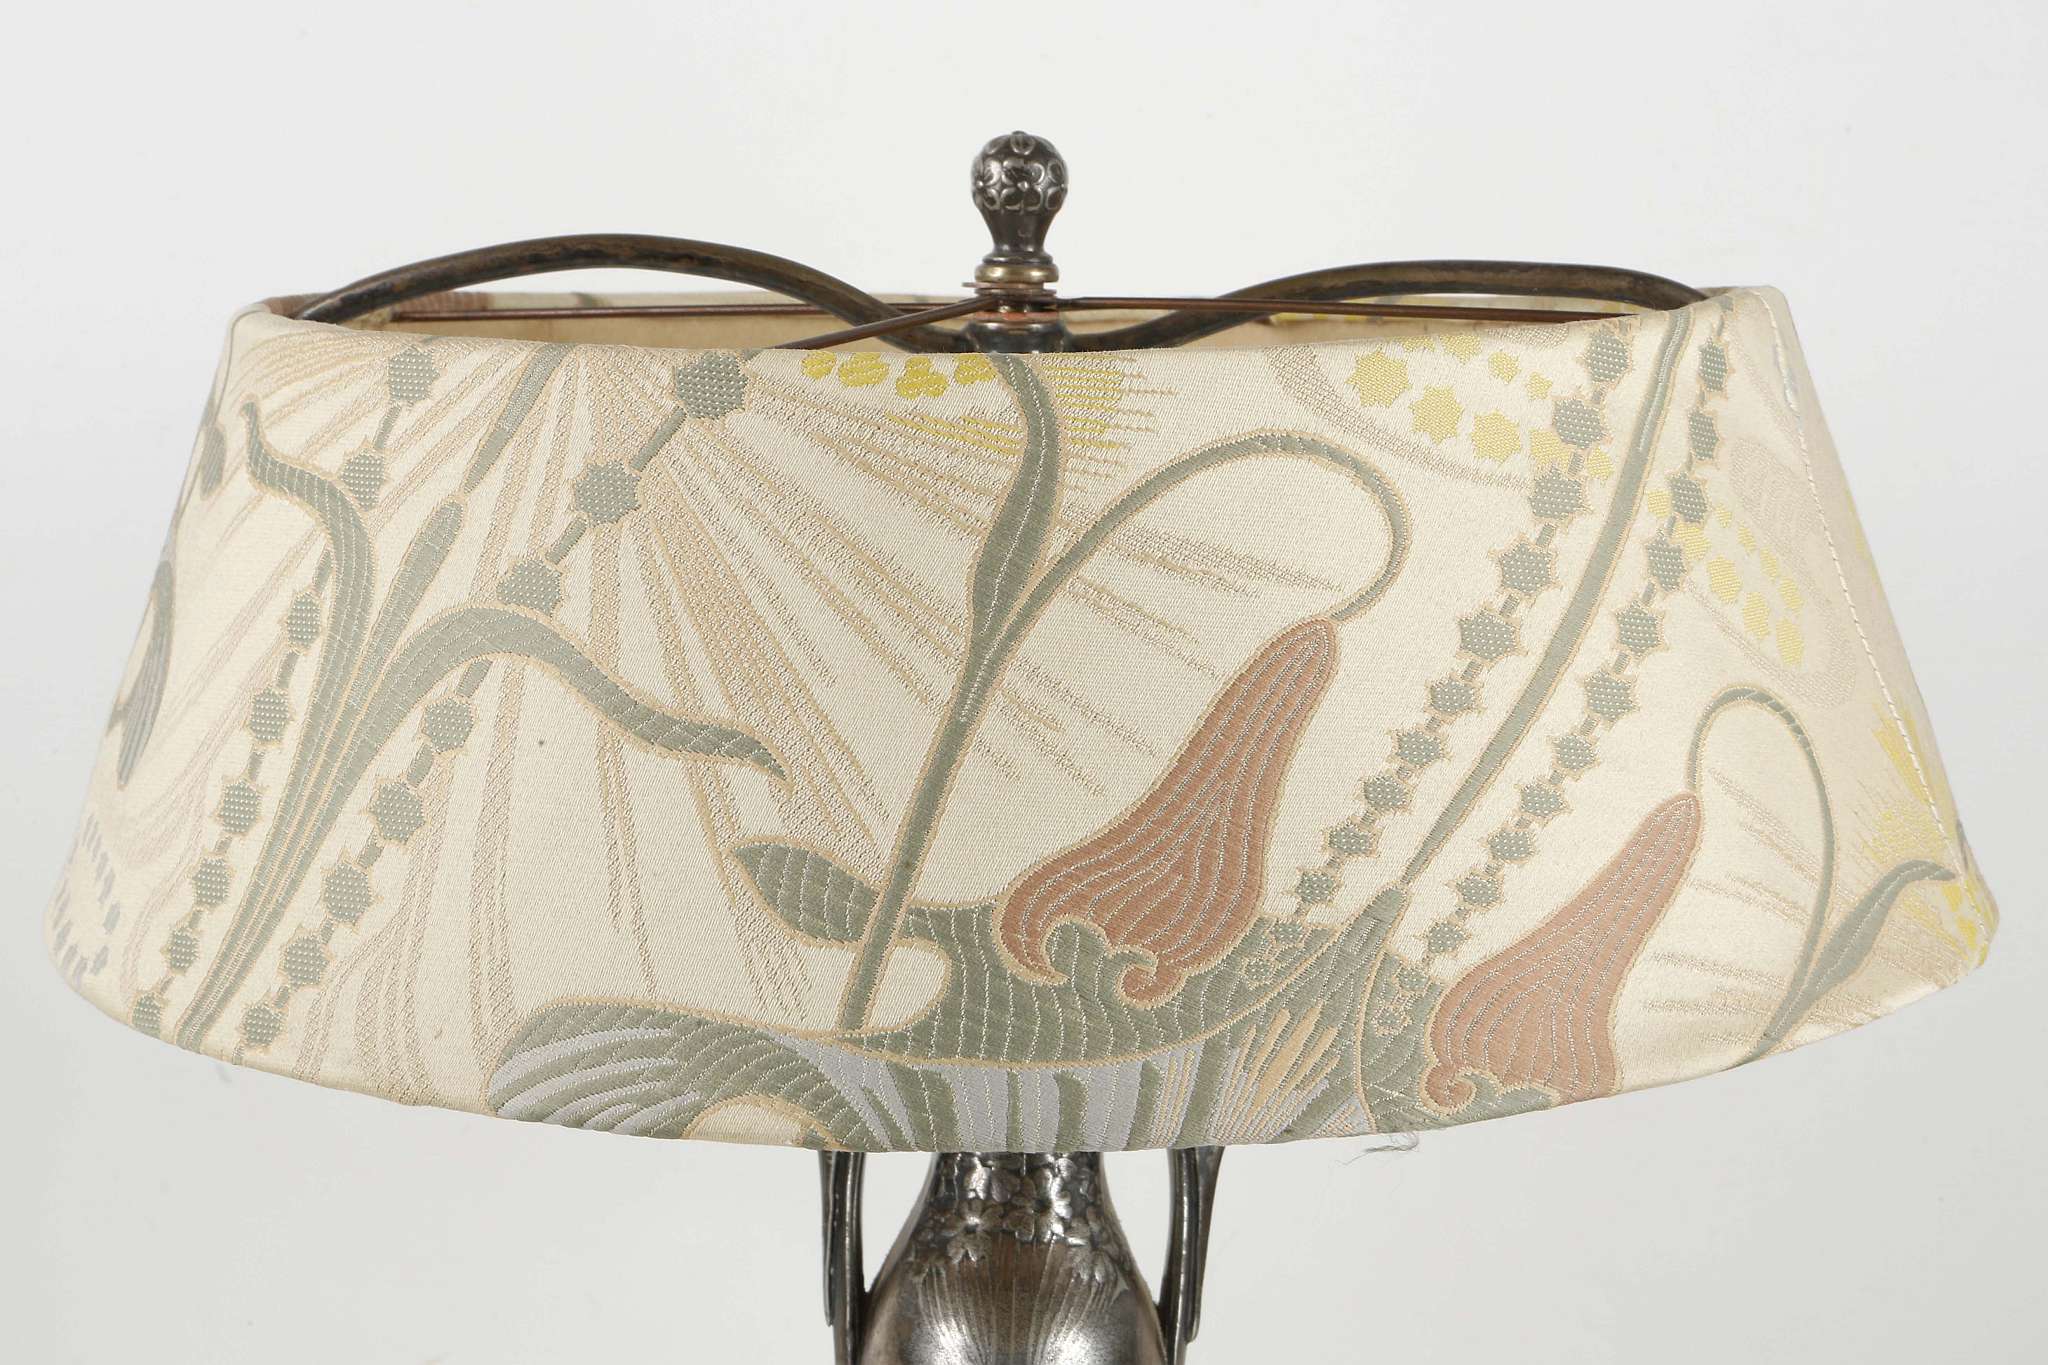 ATTRIBUTED TO OSIRIS, AN ART NOUVEAU PERIOD METAL TABLE LAMP, with embossed decoration, (46cm high) - Image 5 of 6